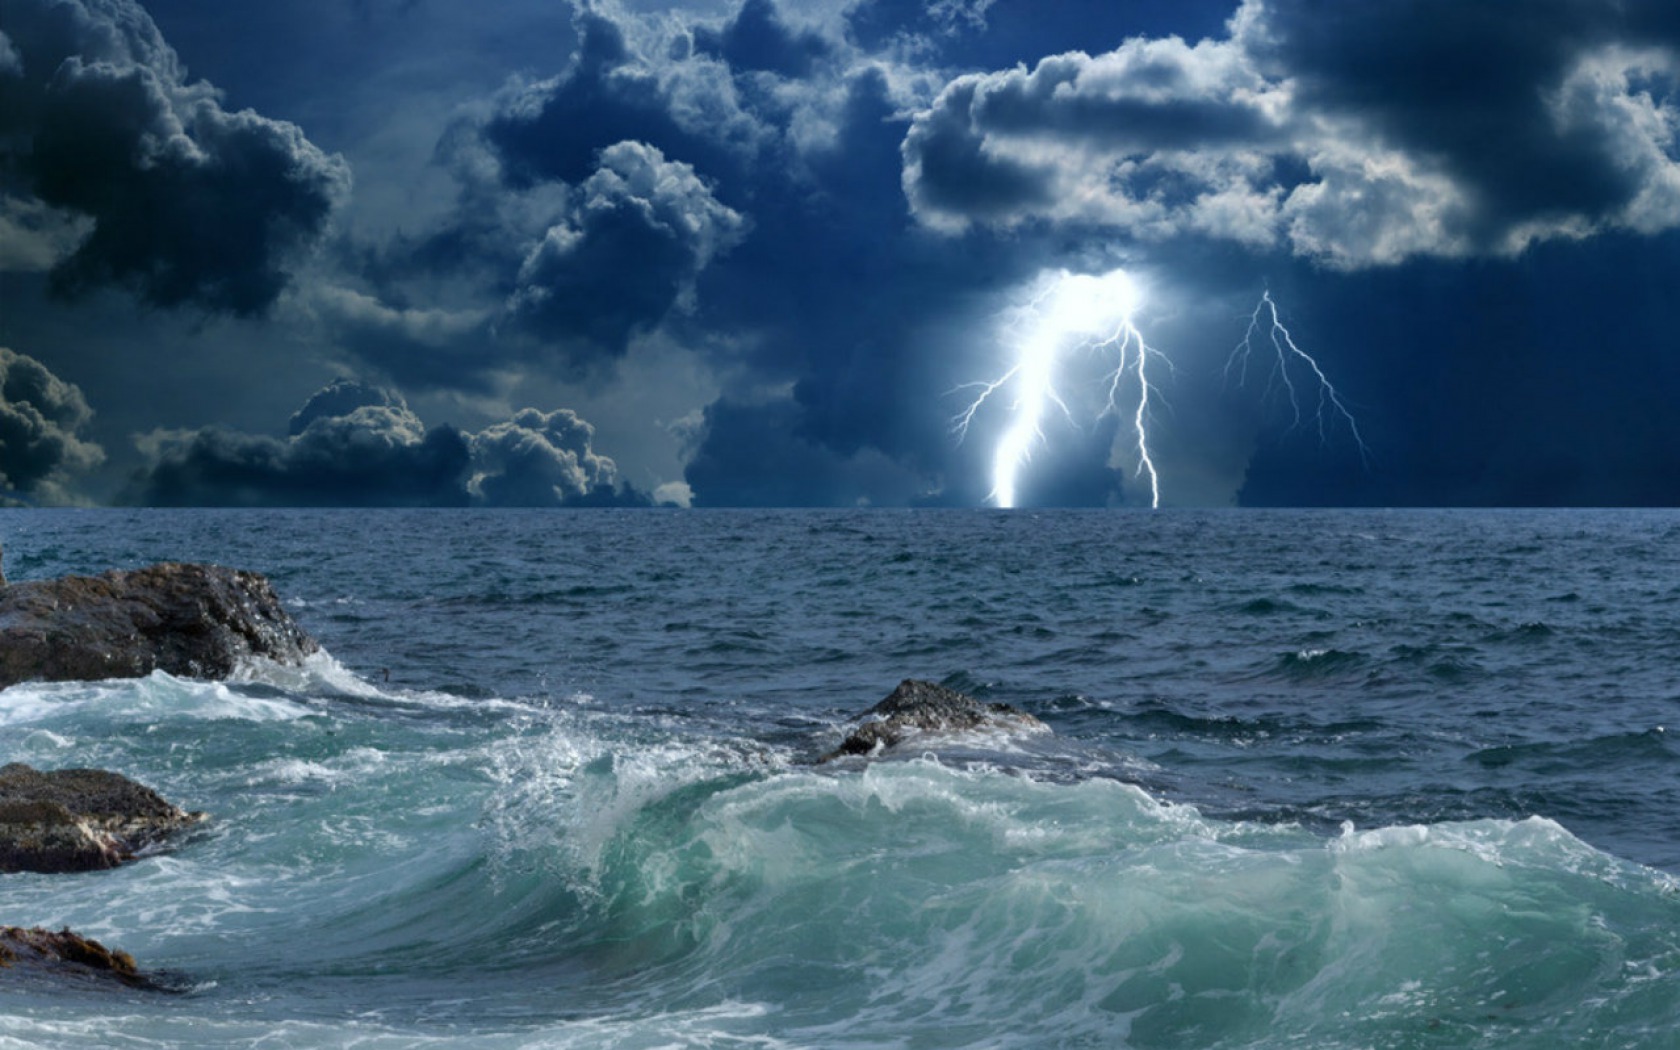 Storm Clouds and Lightning over the Ocean - Image Abyss